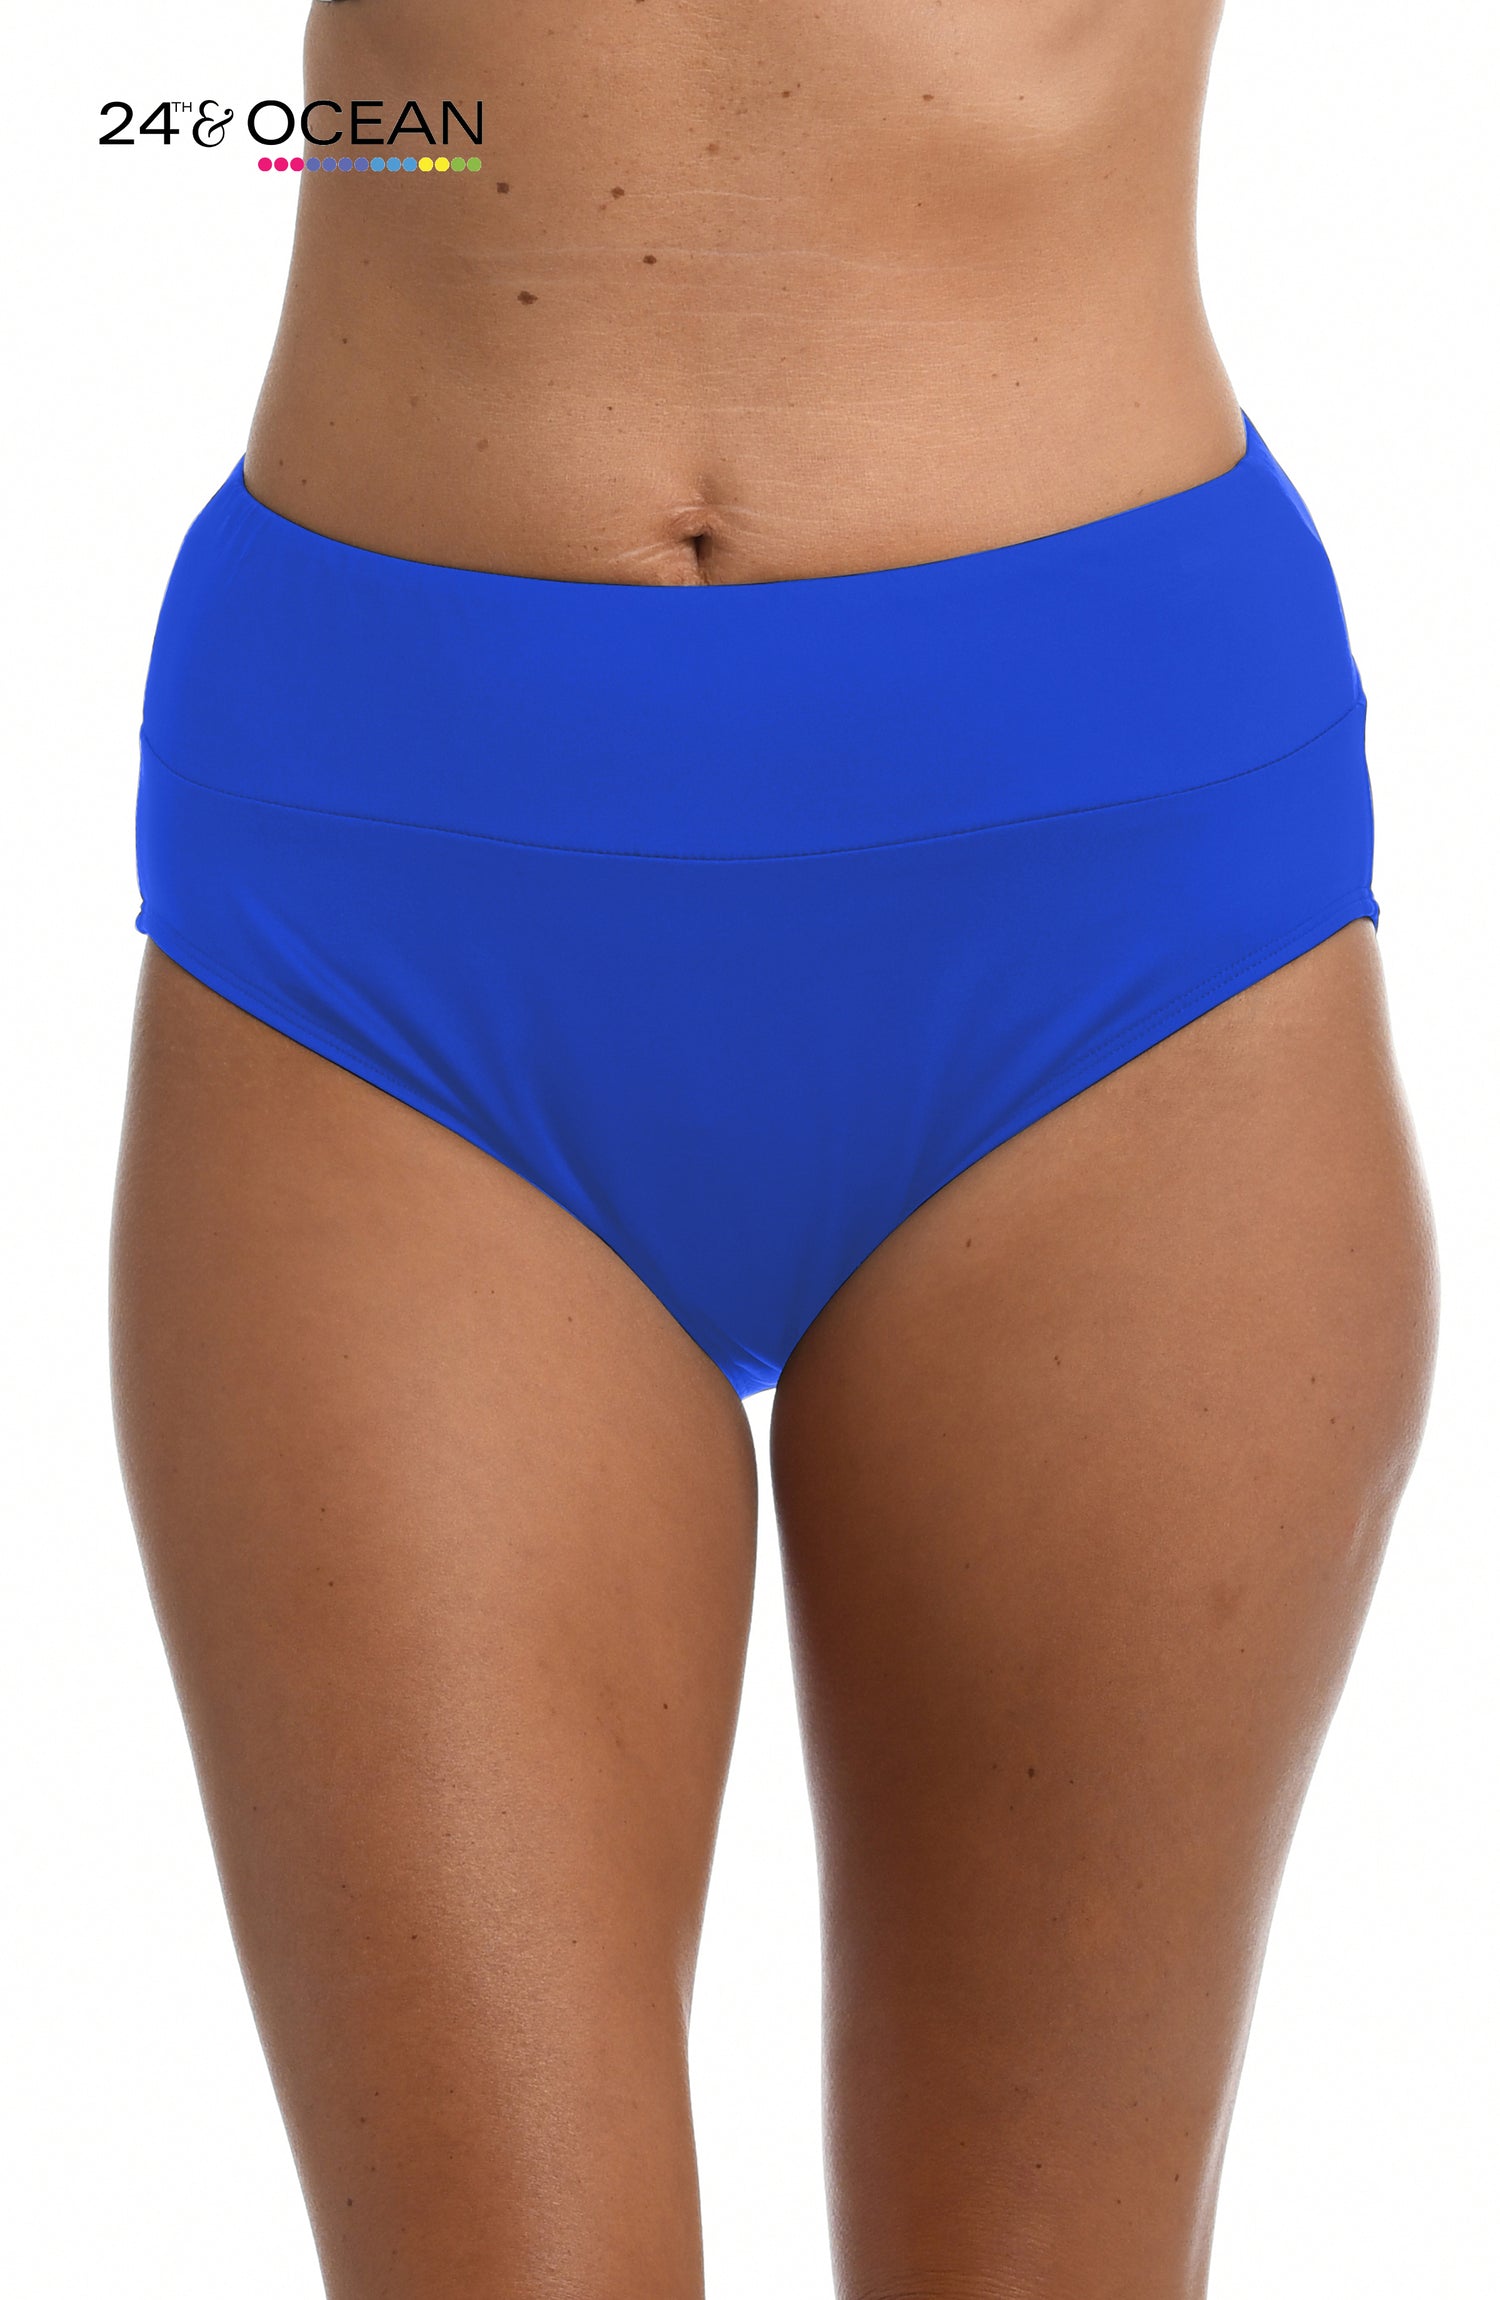 Model is wearing a solid sapphire blue colored high waist bikini bottom from our 24th & Ocean brand.